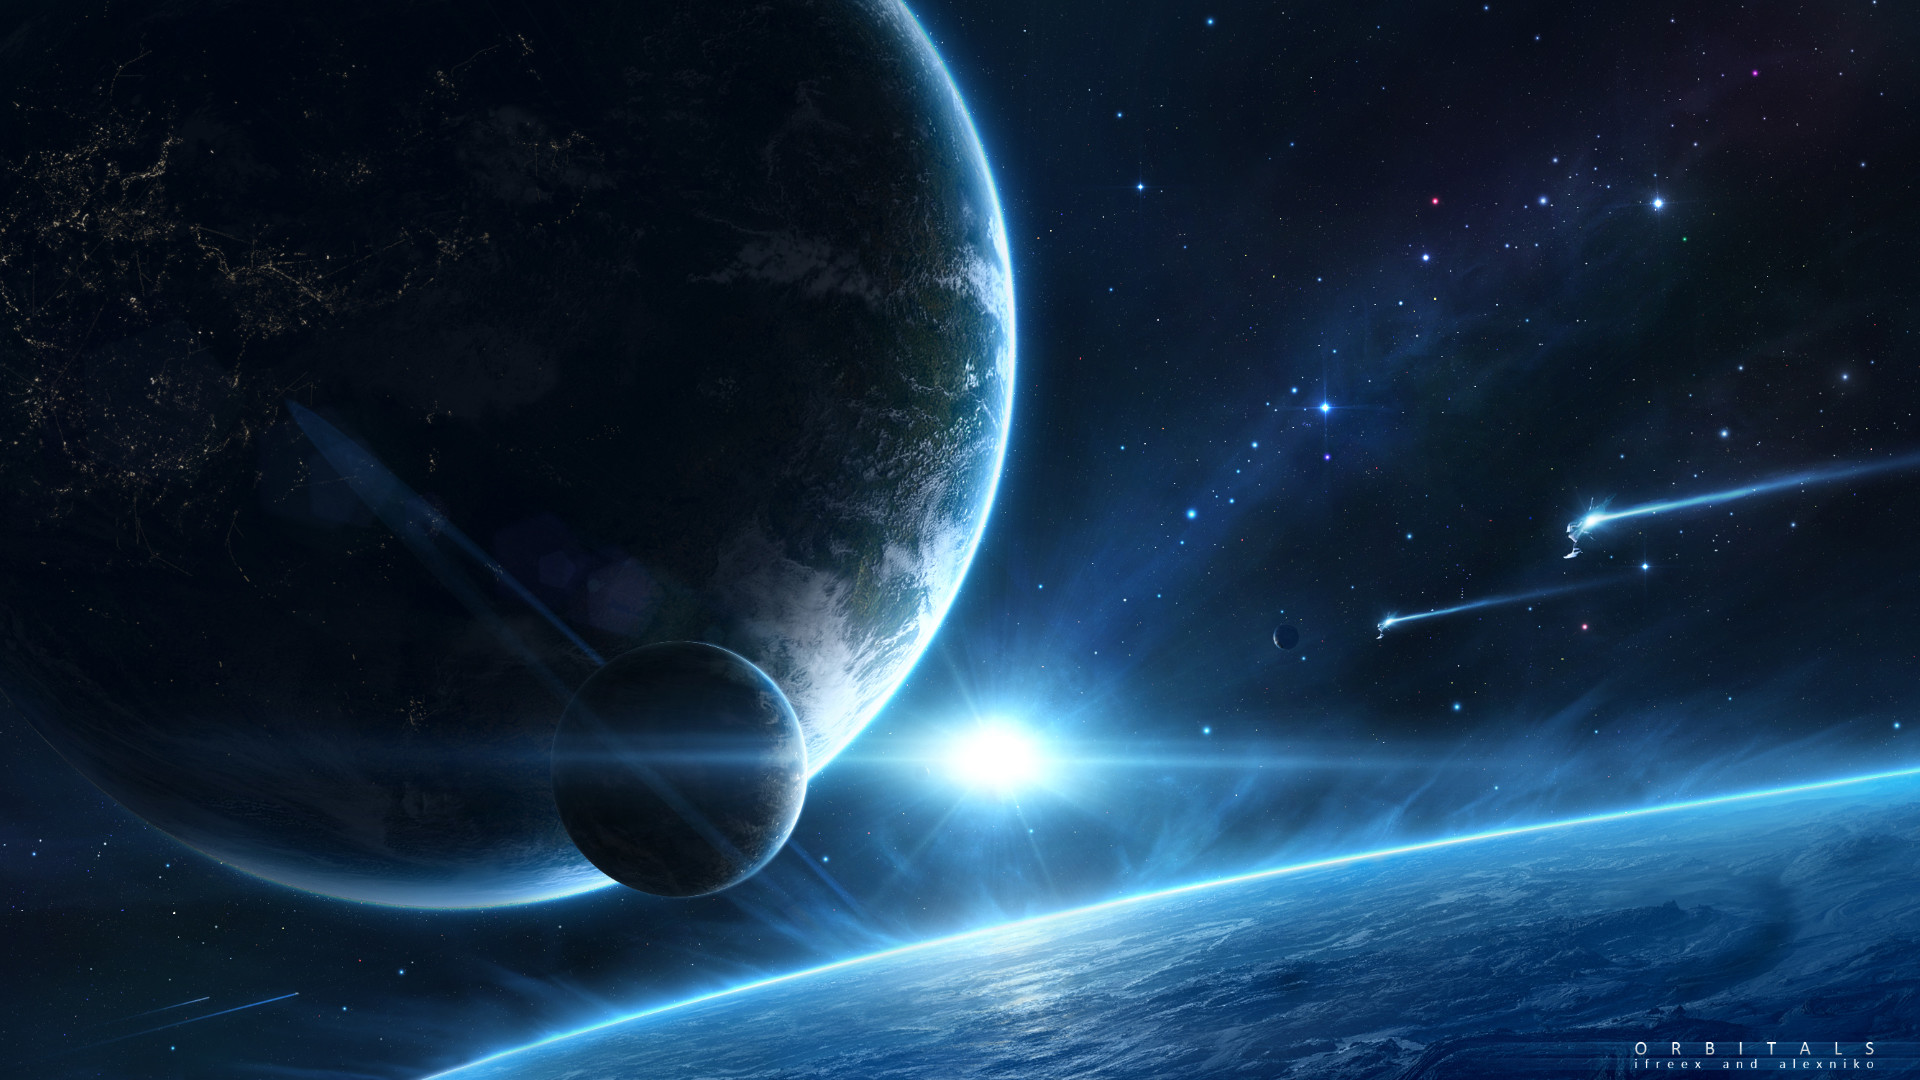 Awesome space wallpapers hd